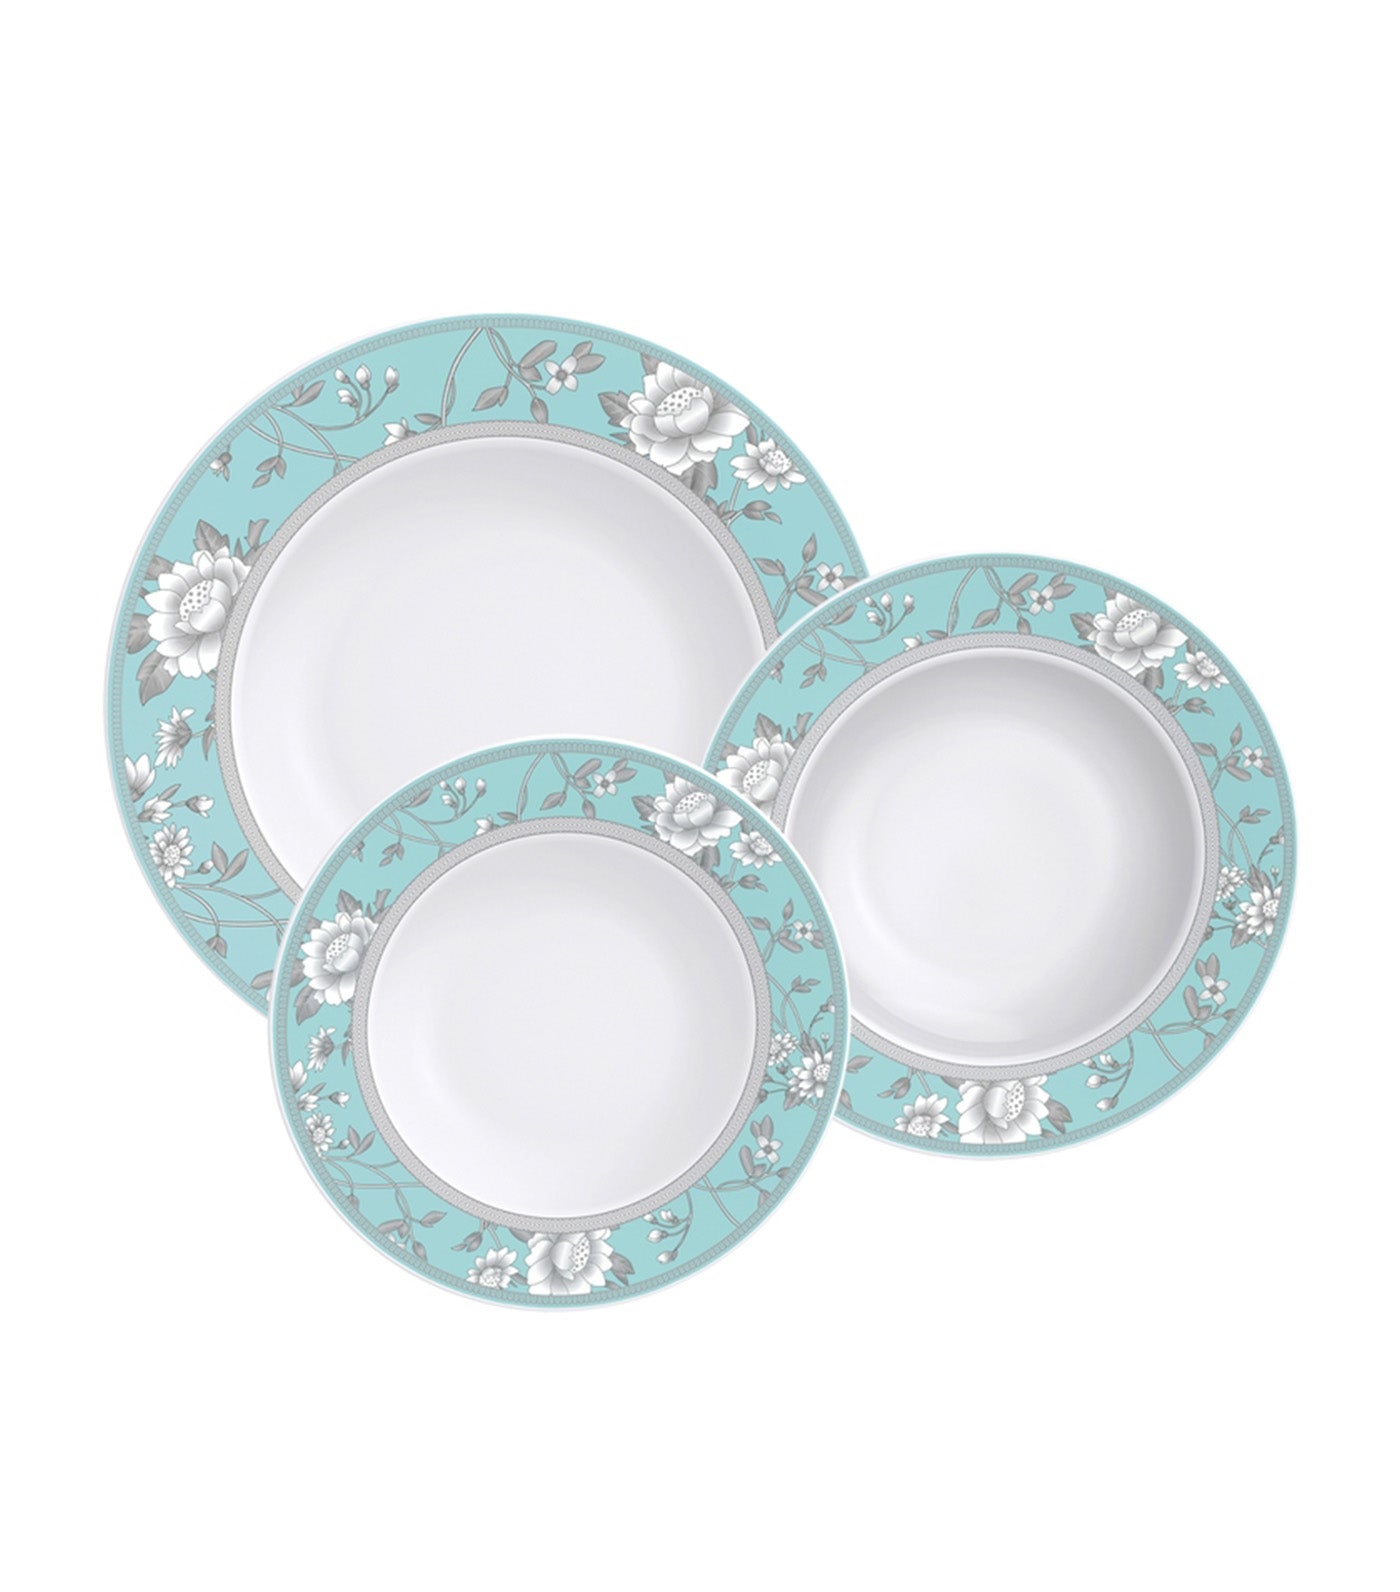 Tramontina Helen Decorated Porcelain Collection